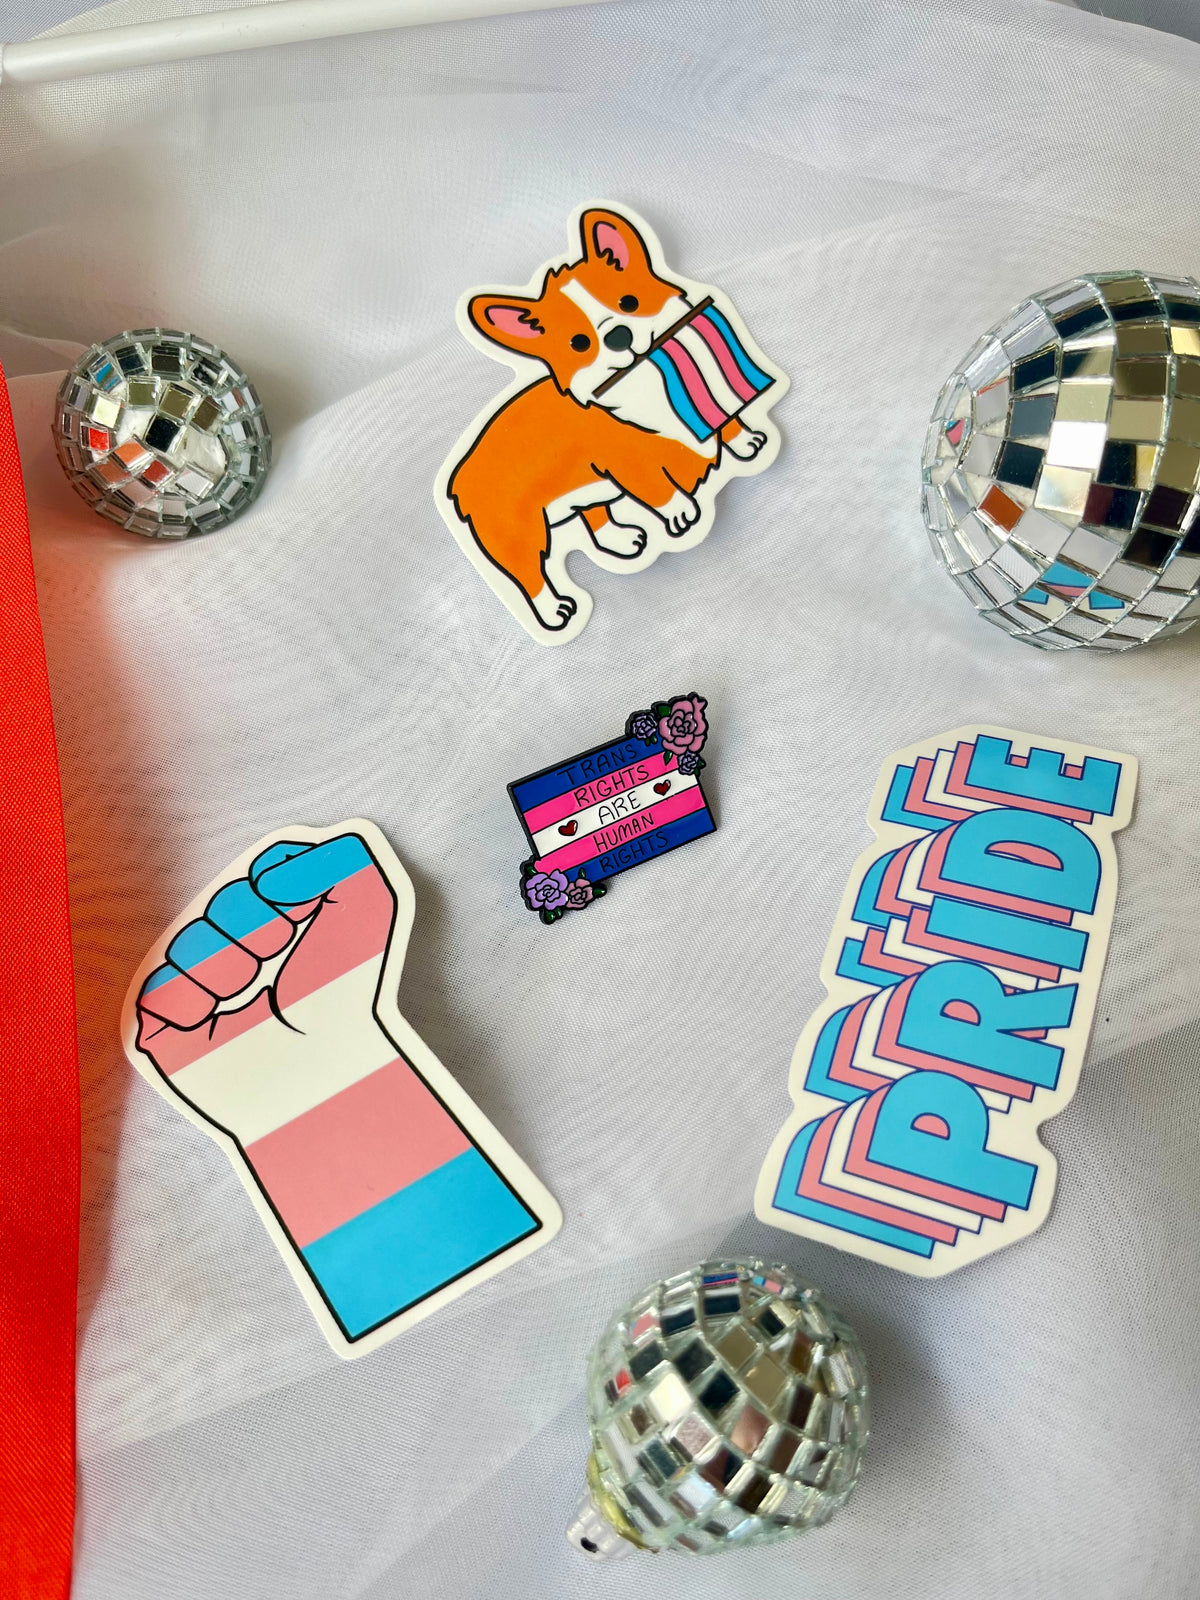 Trans Rights Are Human Rights Pin